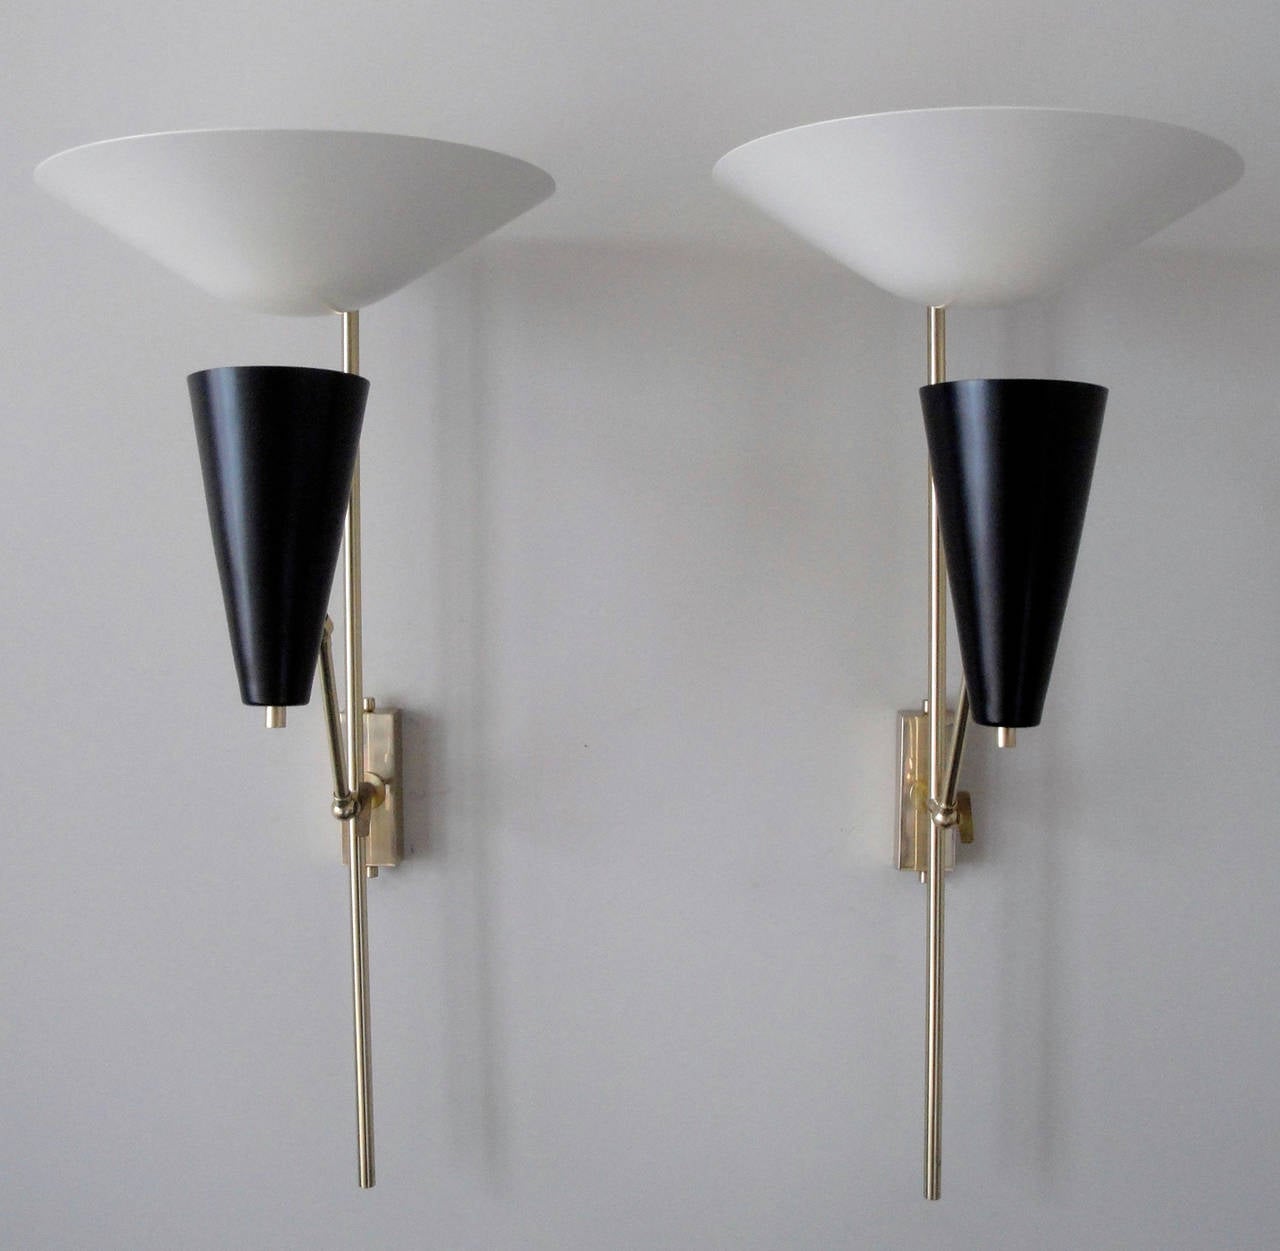 A pair of sconces with white deflector and movable black metal shades. Brass structure with pivots accommodating different positions for black shade.